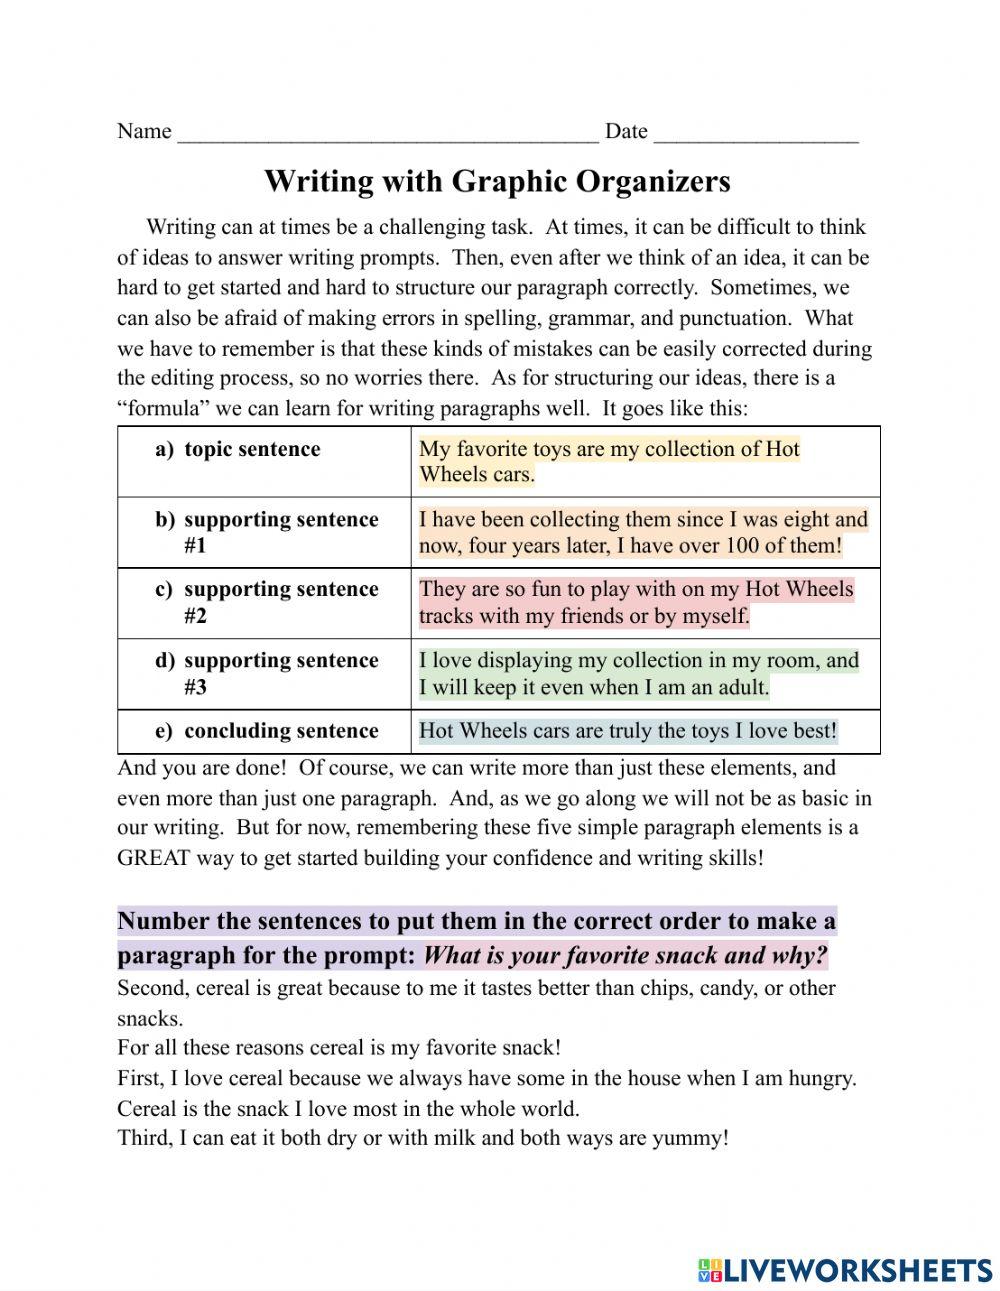 Writing with Graphic Organizers